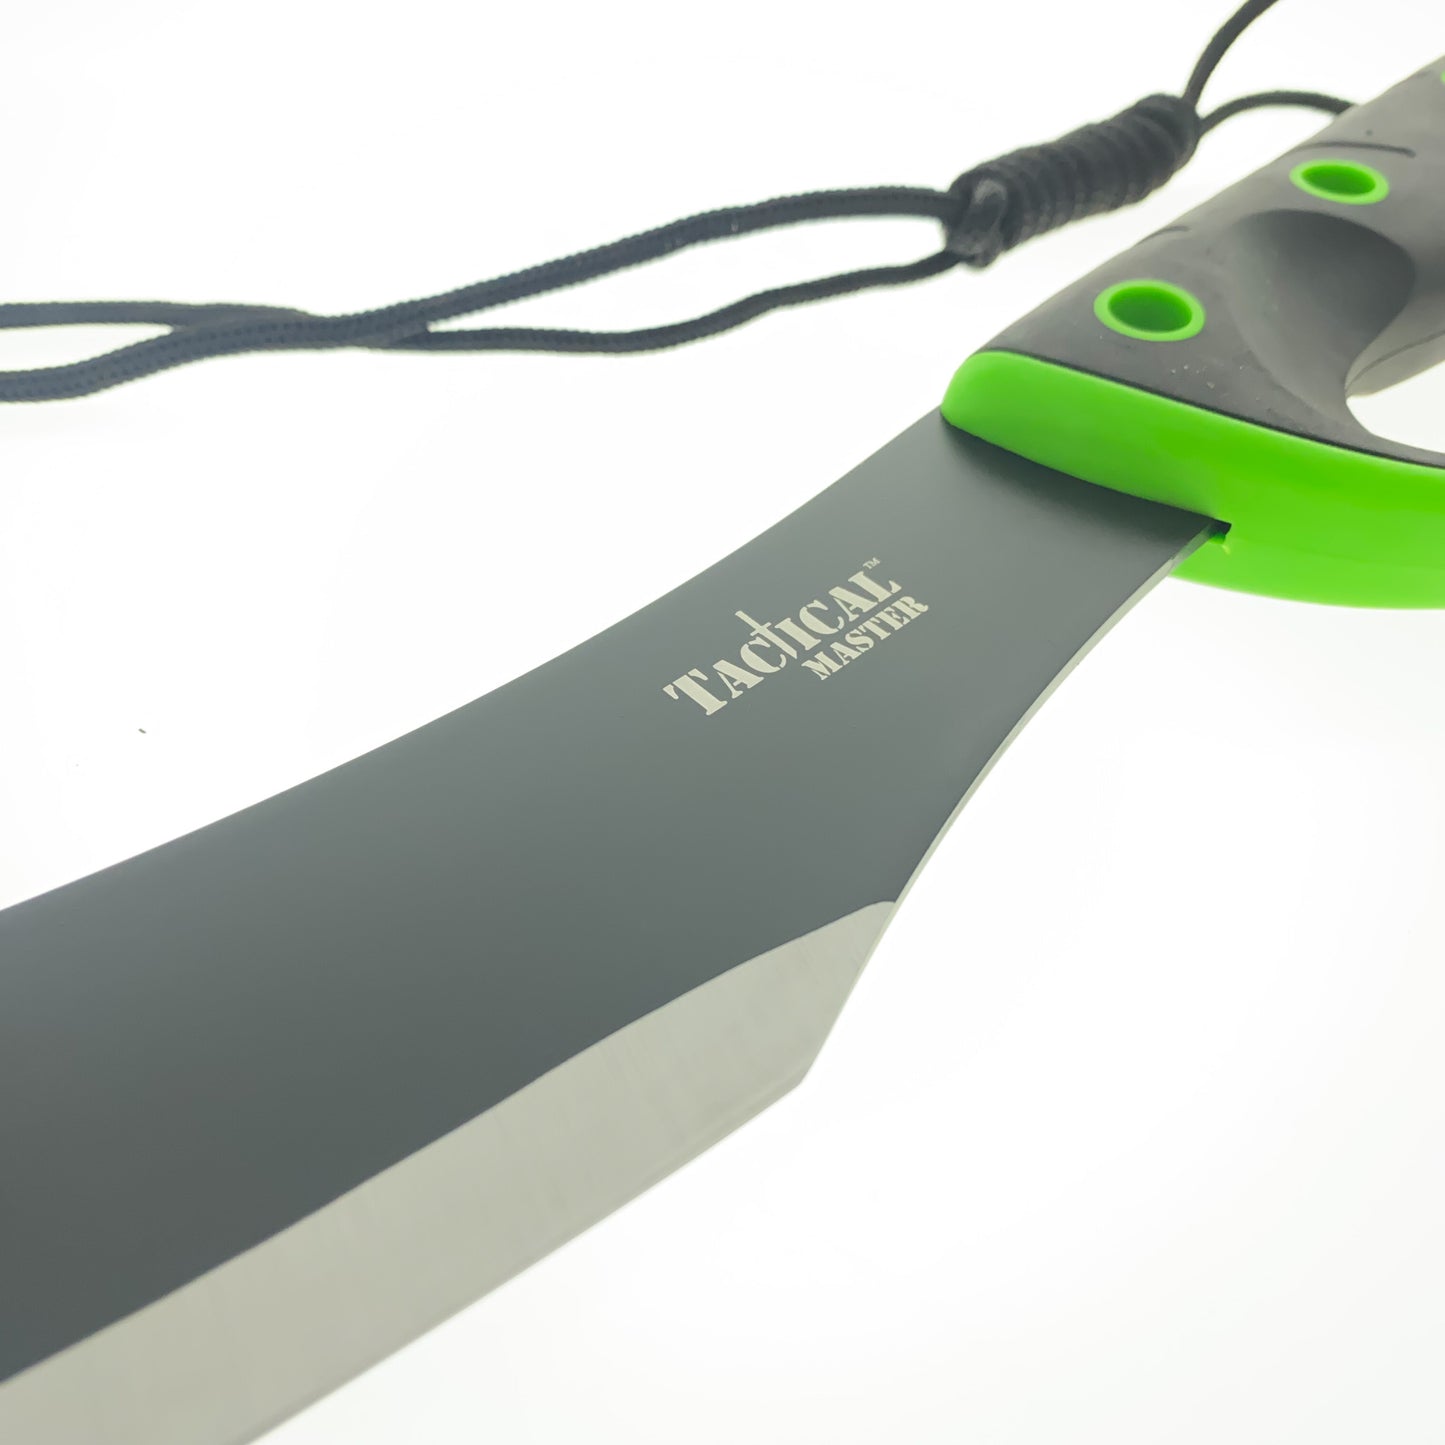 Tactical Master 20" Black and Green Machete w/ Fire Starter & Sheath included.